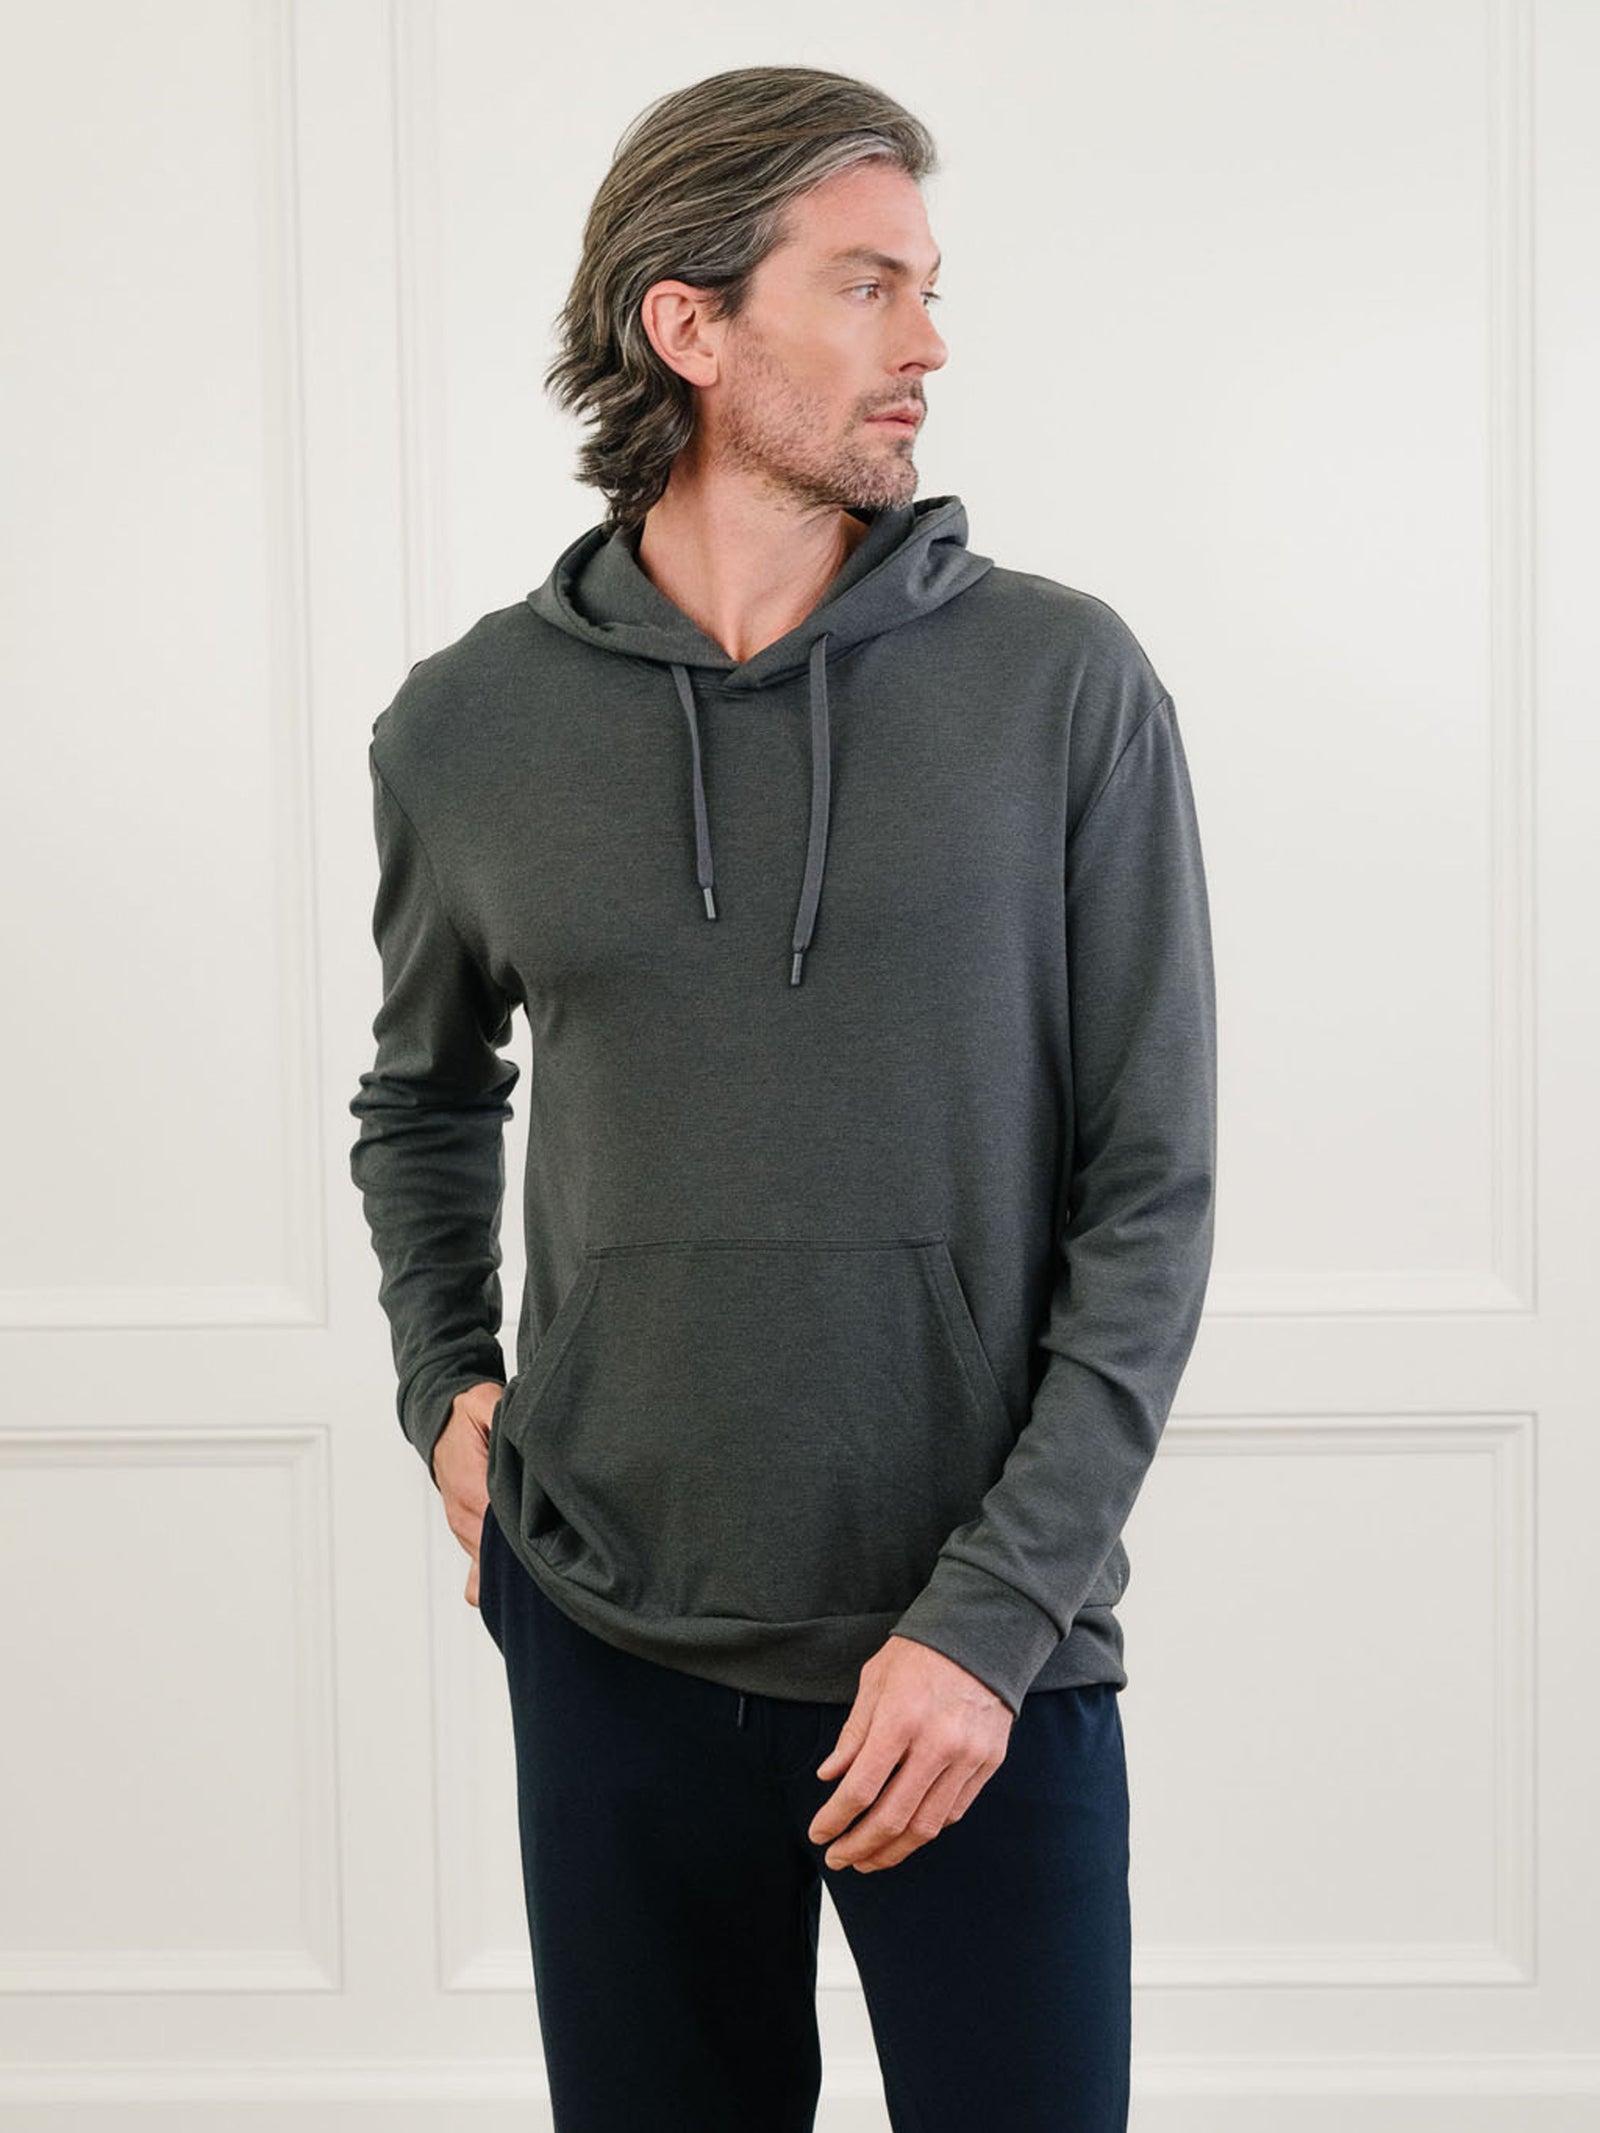 Charcoal Bamboo Hoodie worn by man standing in front of white background.